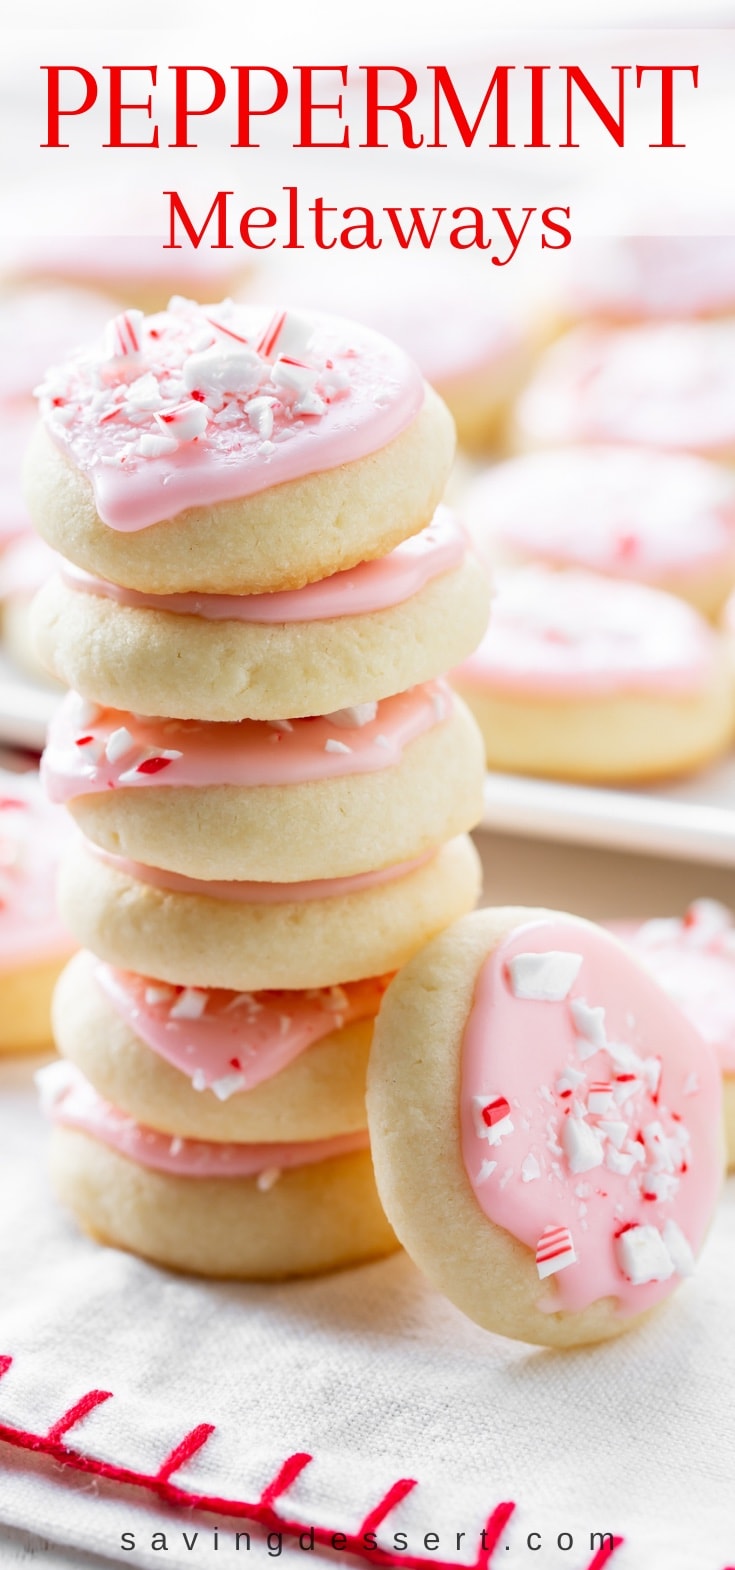 A stack of peppermint meltaway cookies topped with crushed peppermints